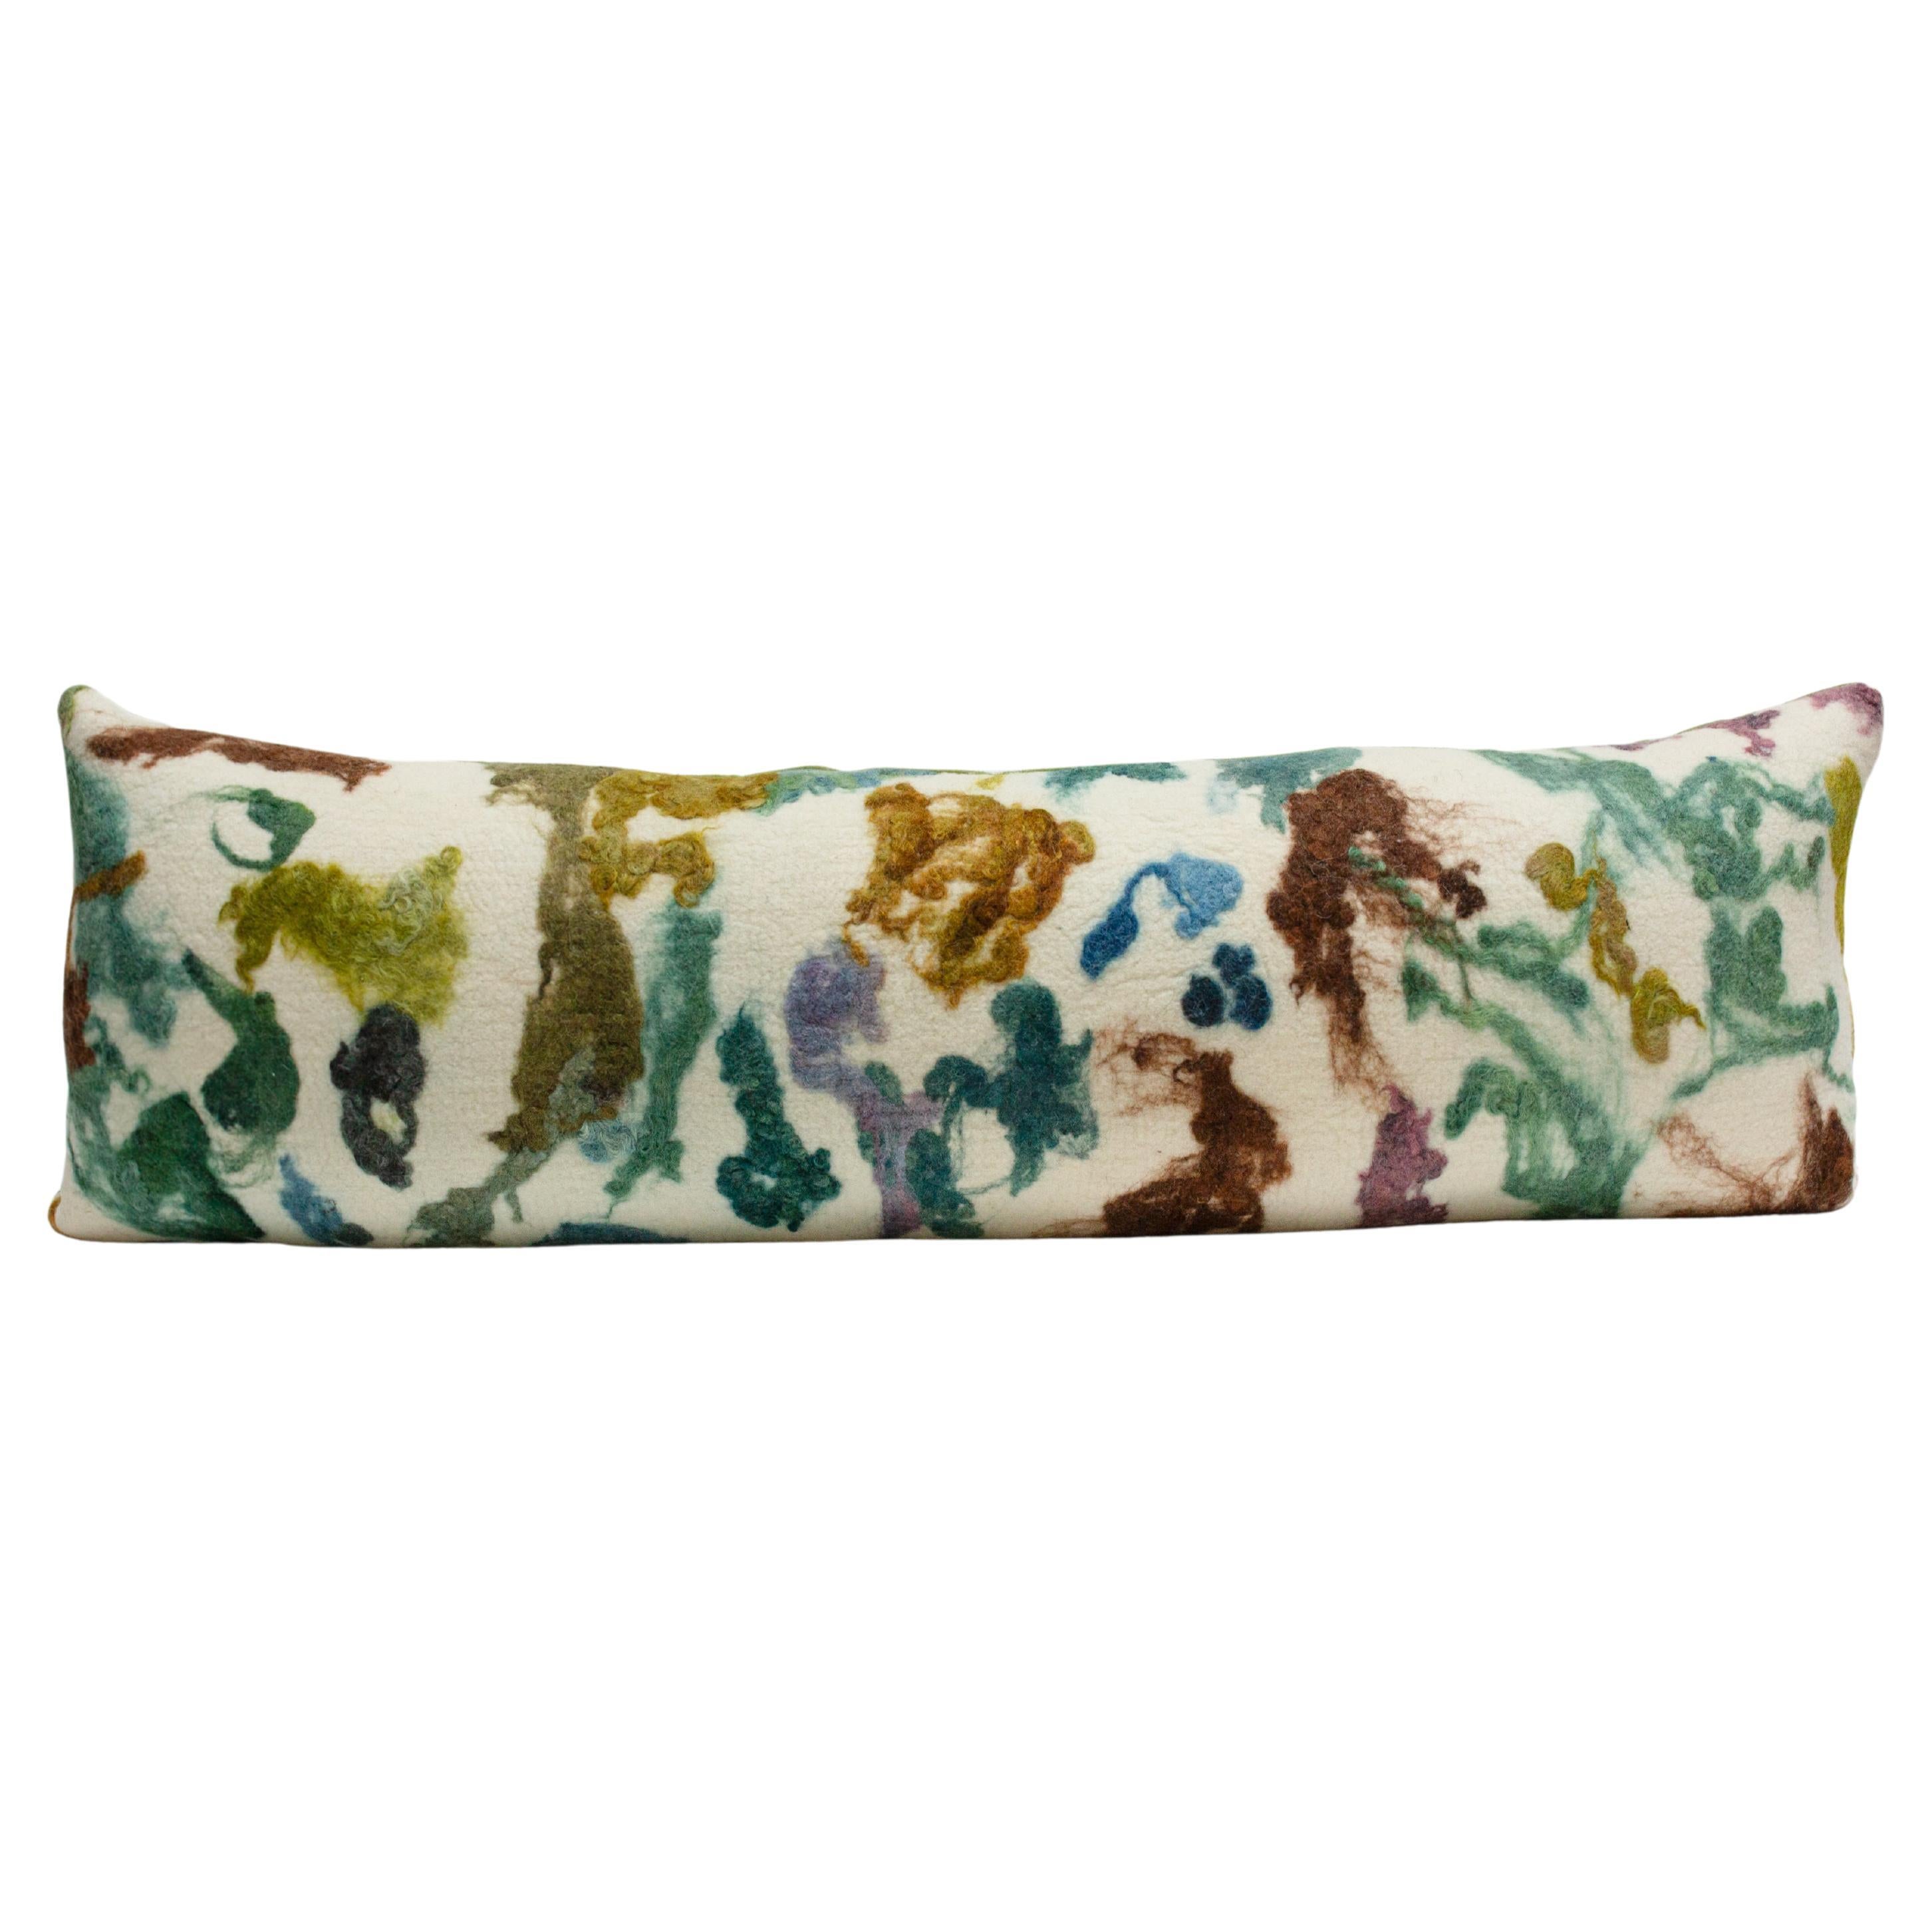 JG Switzer Woodlands Hand Felted Wool Body Pillow with Prima Alpaca Back